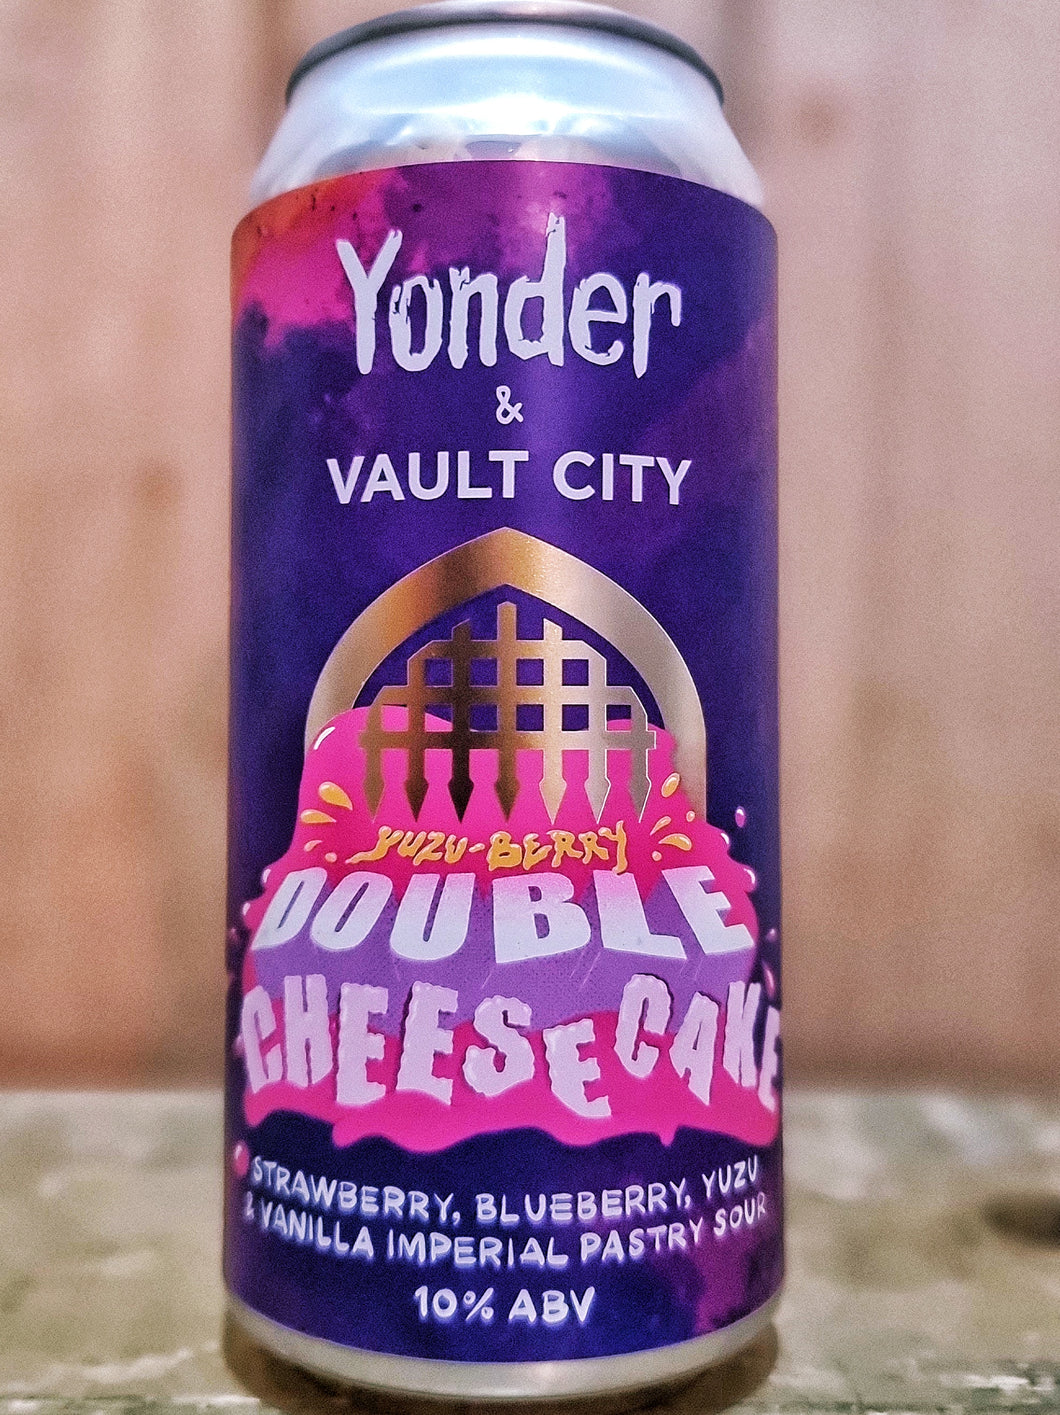 Yonder Brewing v Vault City - Yuzu Berry Double Cheesecake